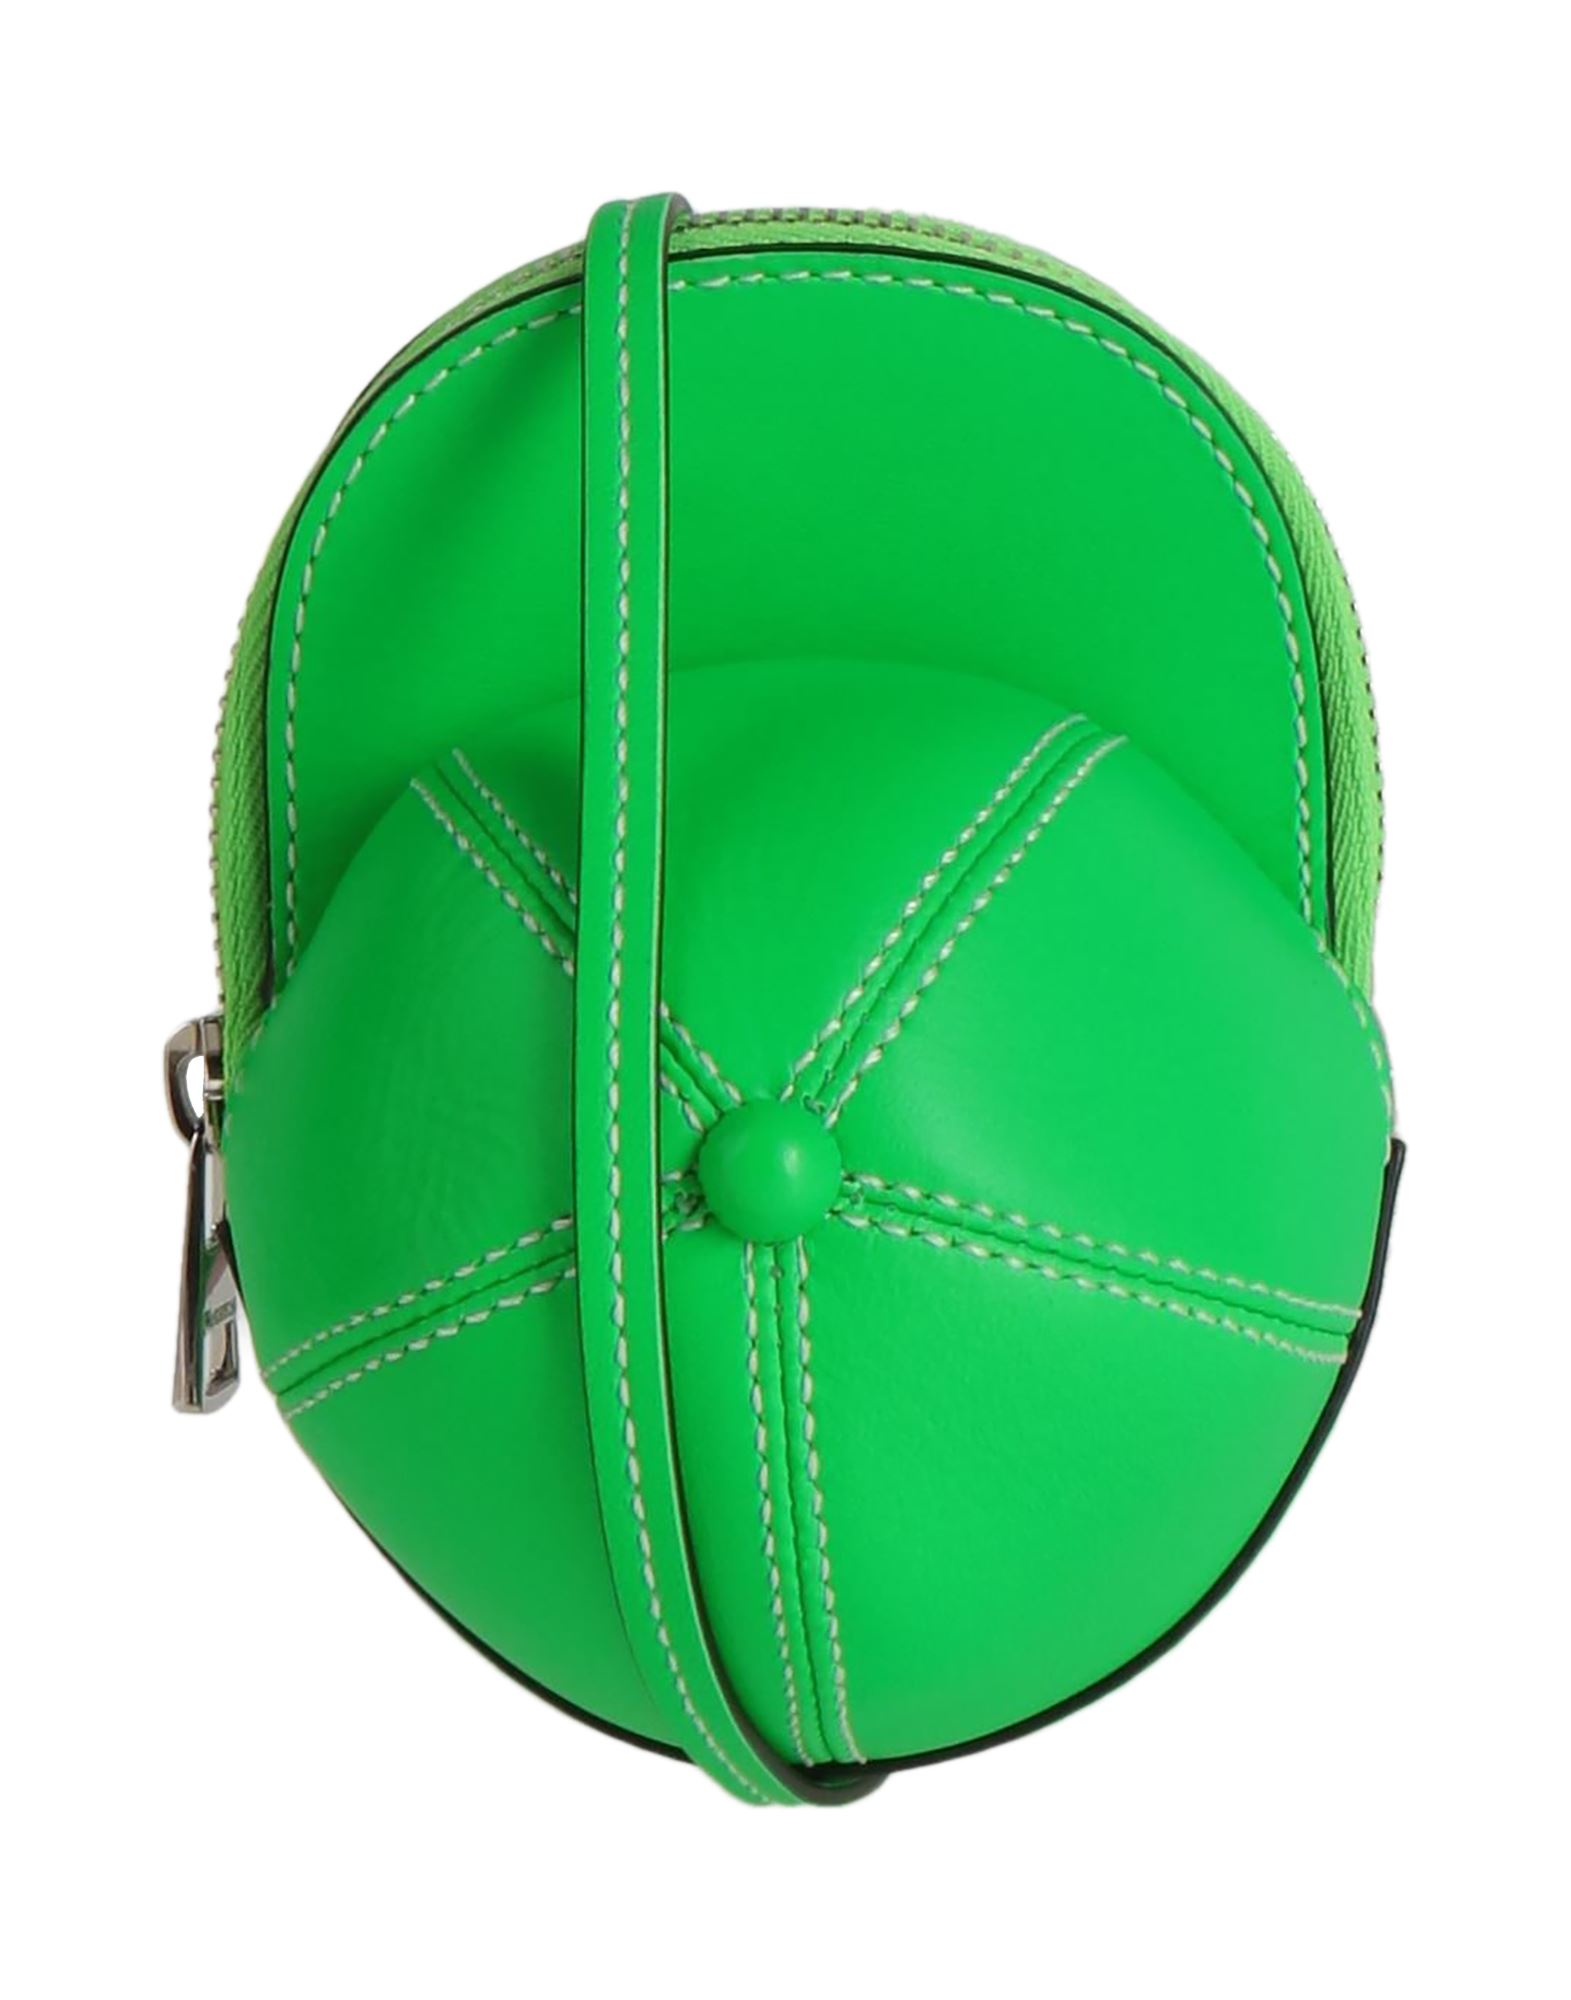 JW ANDERSON JW ANDERSON WOMAN CROSS-BODY BAG GREEN SIZE - SOFT LEATHER